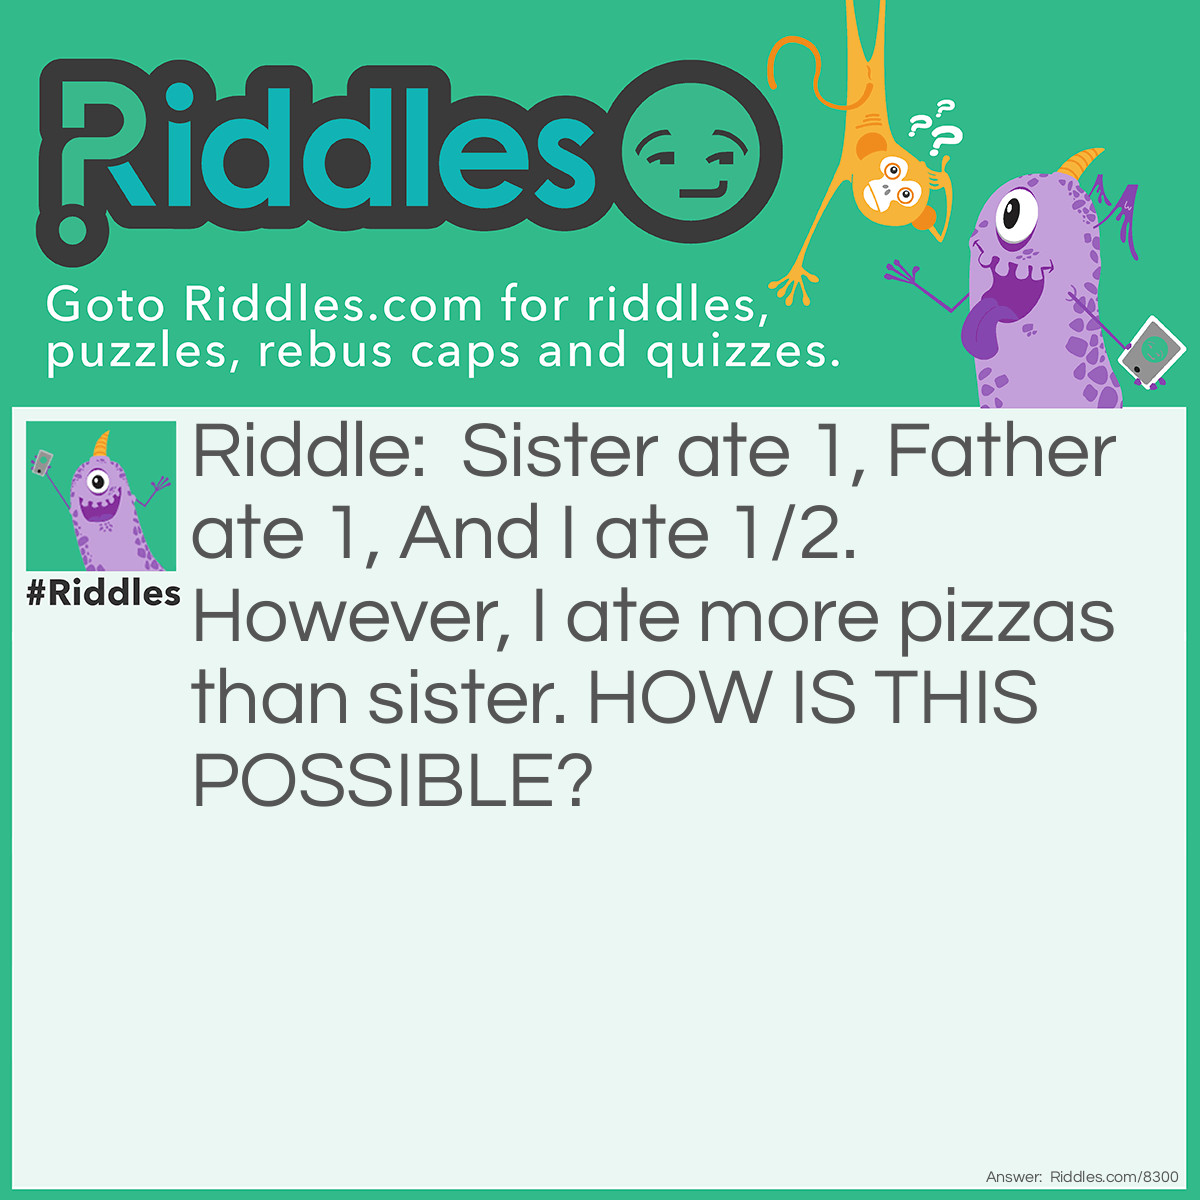 Riddle: Sister ate 1, Father ate 1, And I ate 1/2. However, I ate more pizzas than sister. HOW IS THIS POSSIBLE? Answer: Sister ate one slice of pizza. But, Father ate one whole pizza. And thus, I ate half a pizza, which is more than sister's single slice.